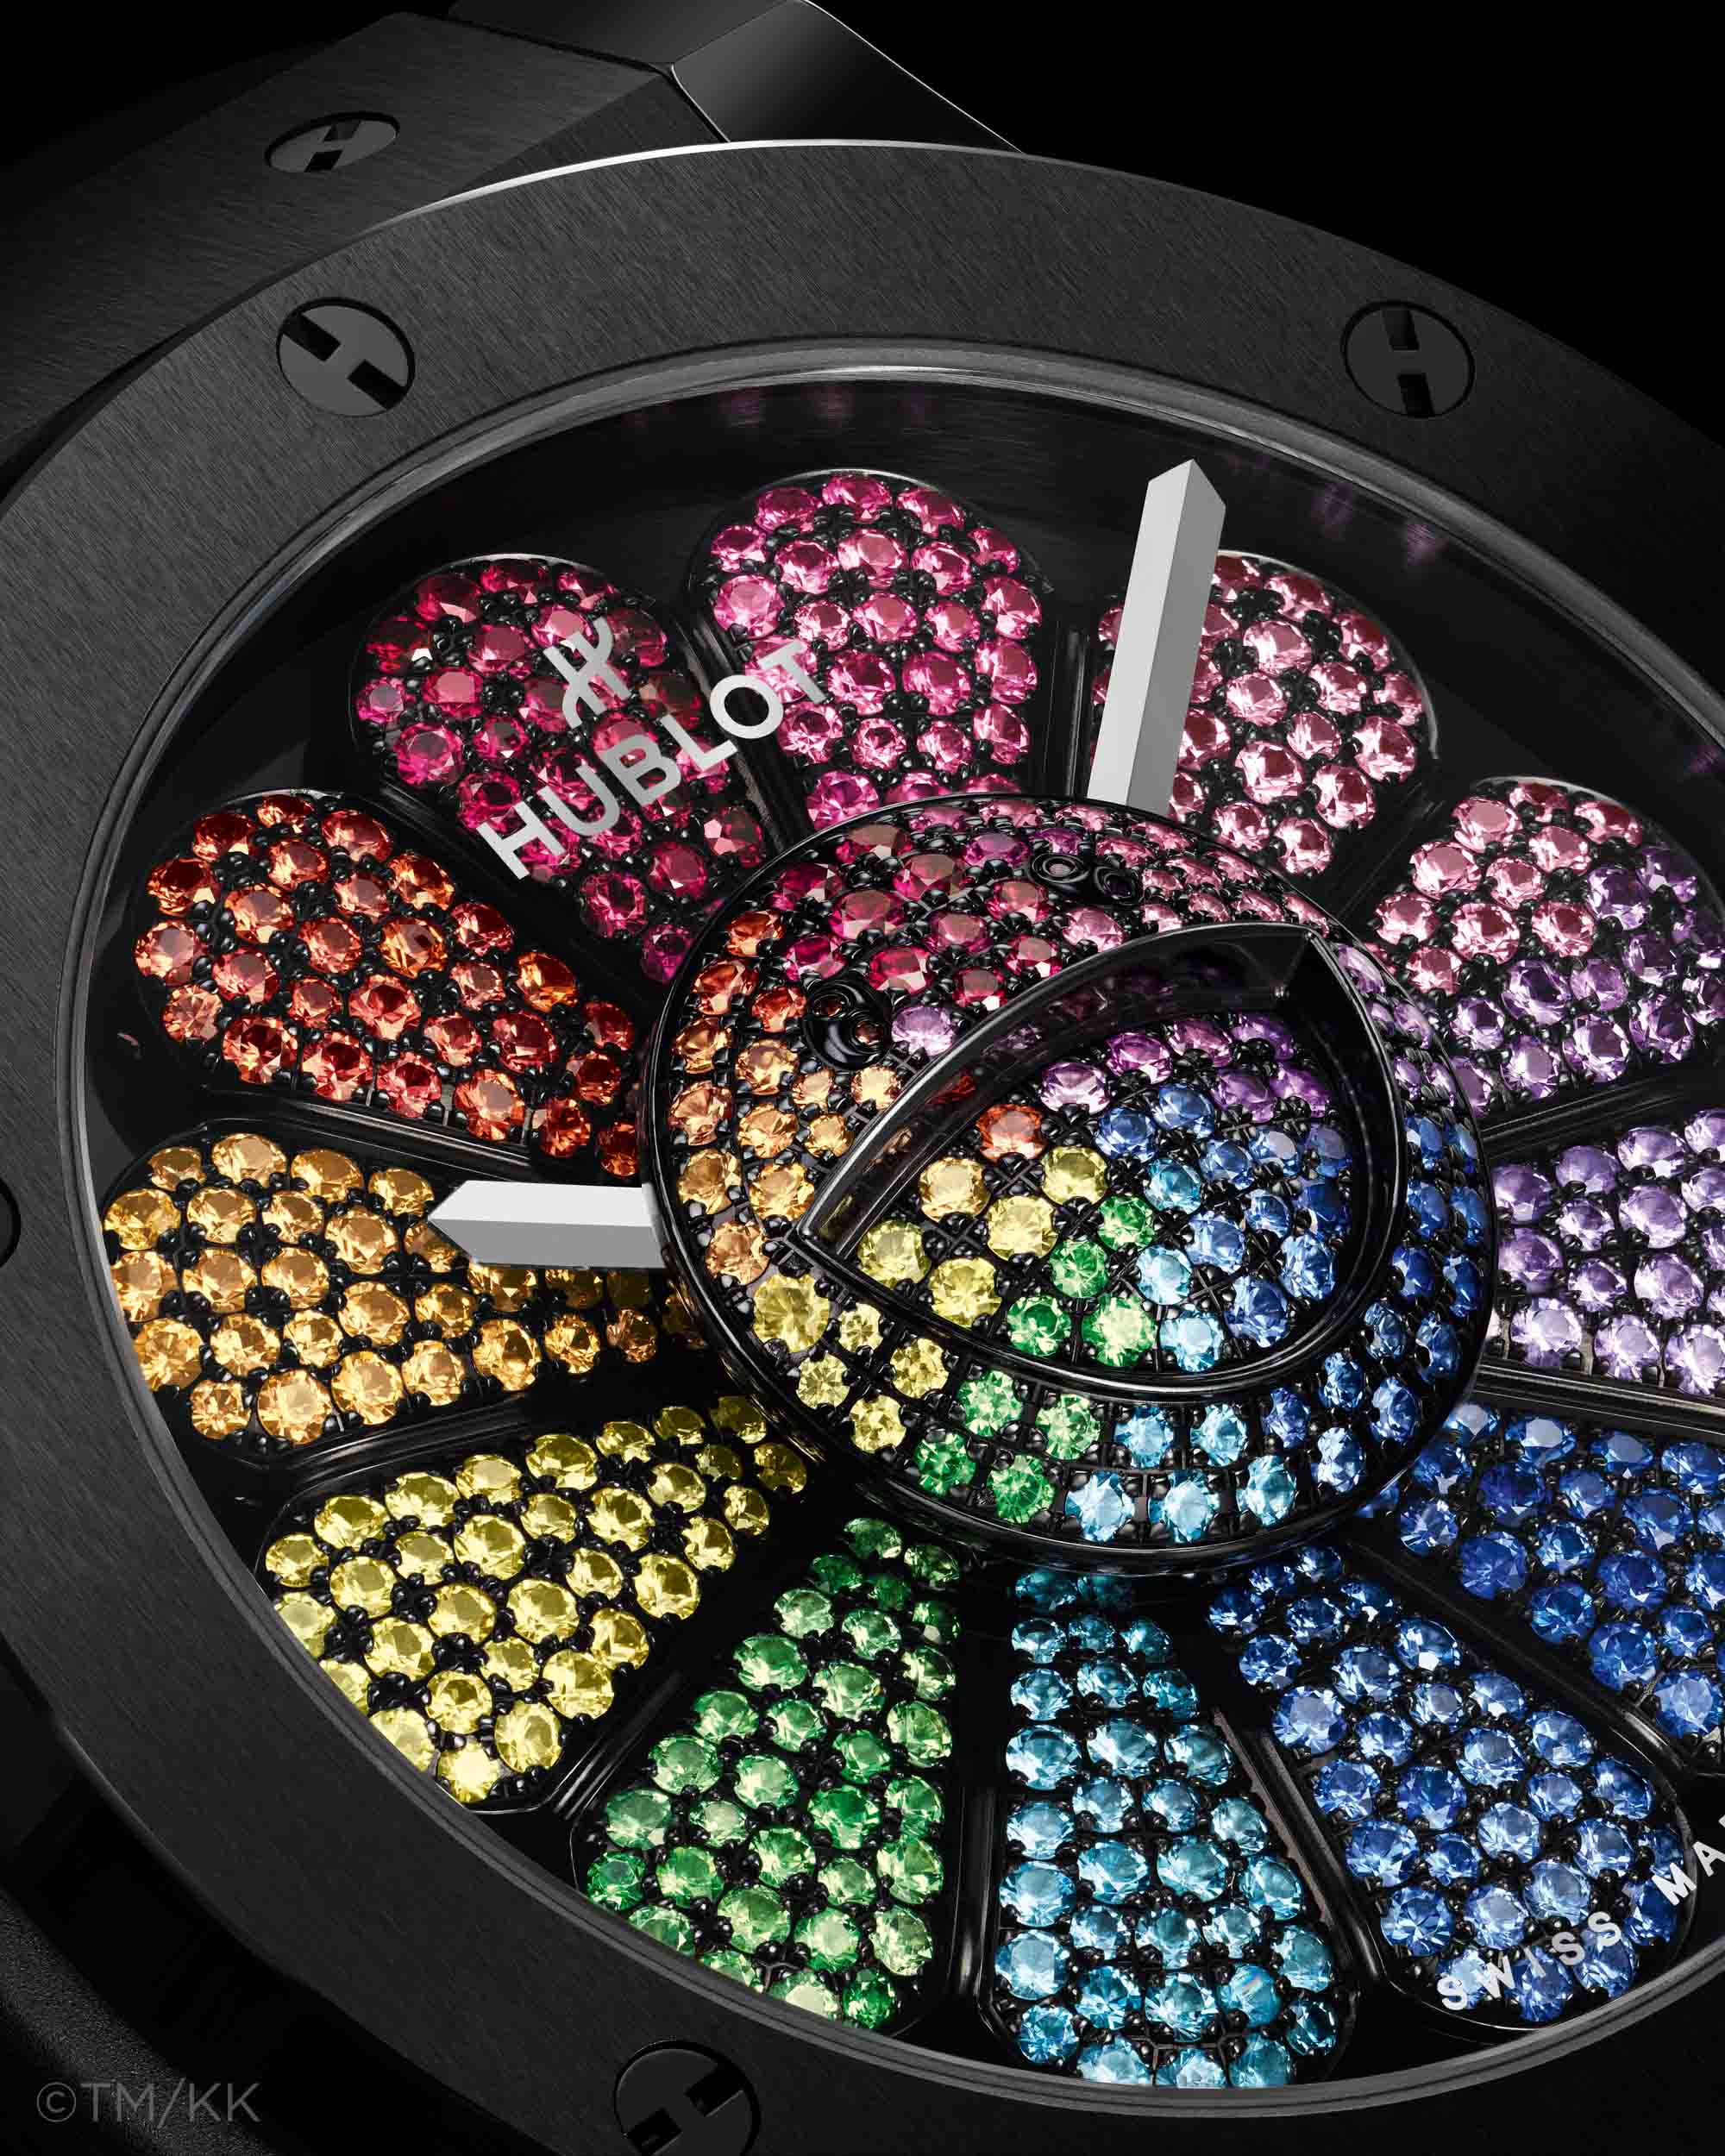 Hublot To Introduce 13 Unique Classic Fusion Murakami Watches With